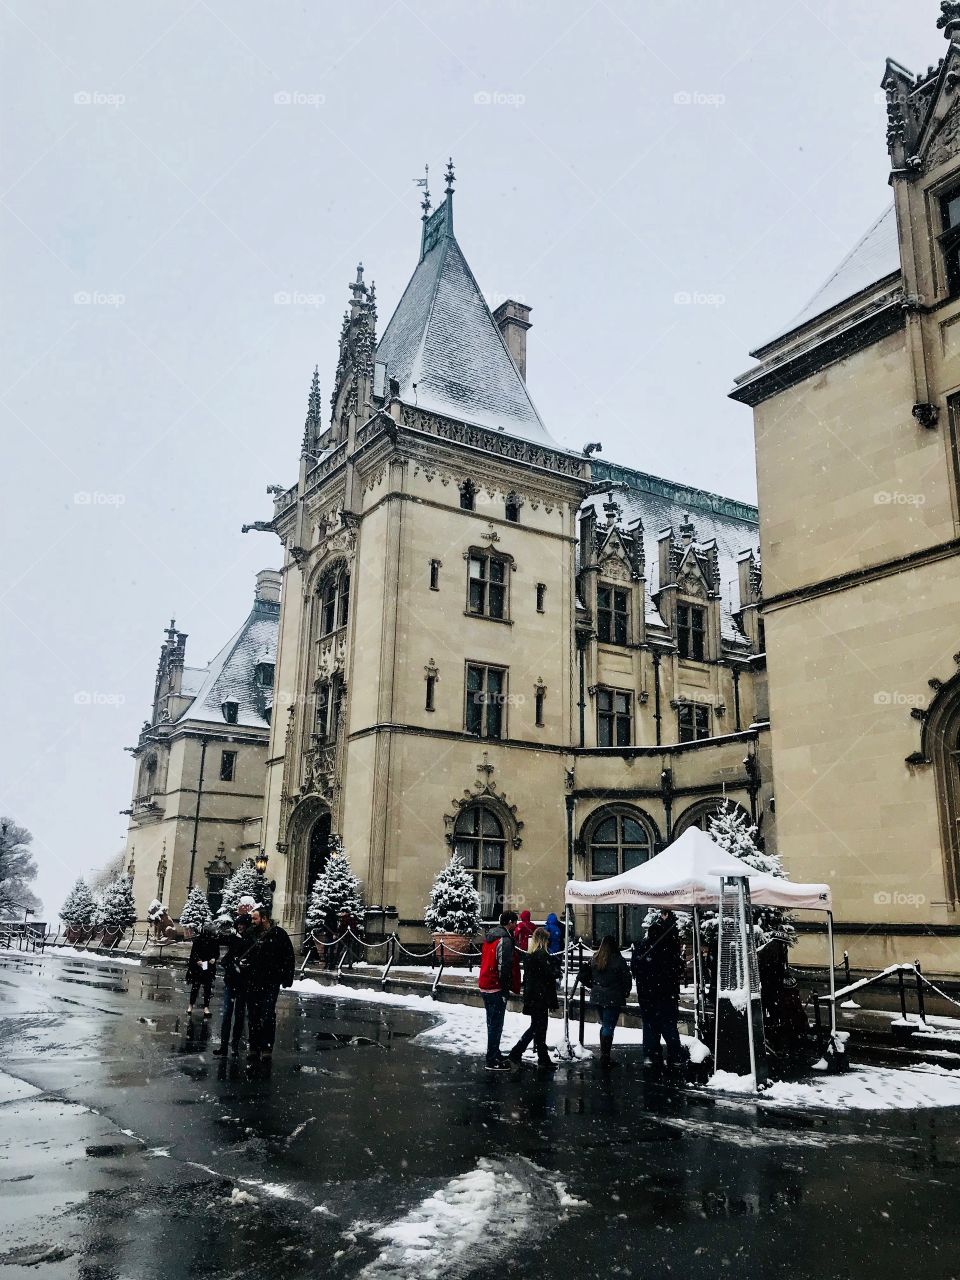 Biltmore in the snow